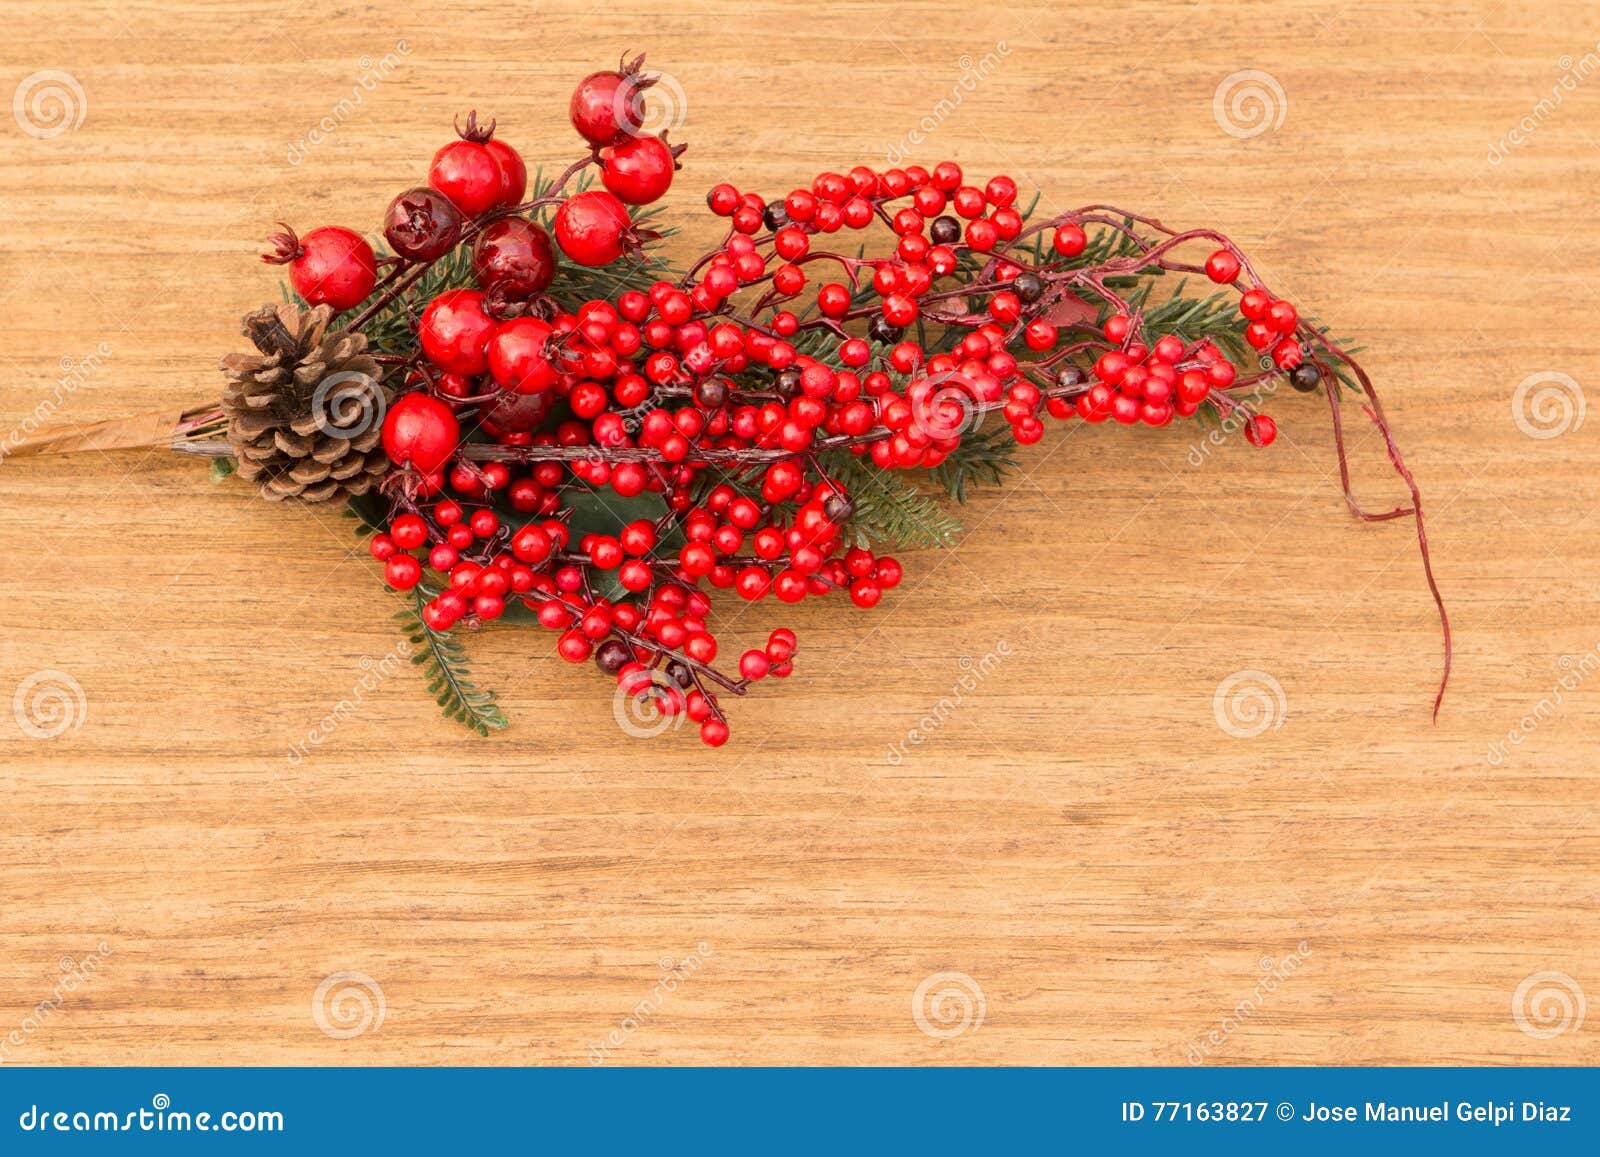 Red Fruits on the Branch Christmas for Decoration Stock Image - Image ...